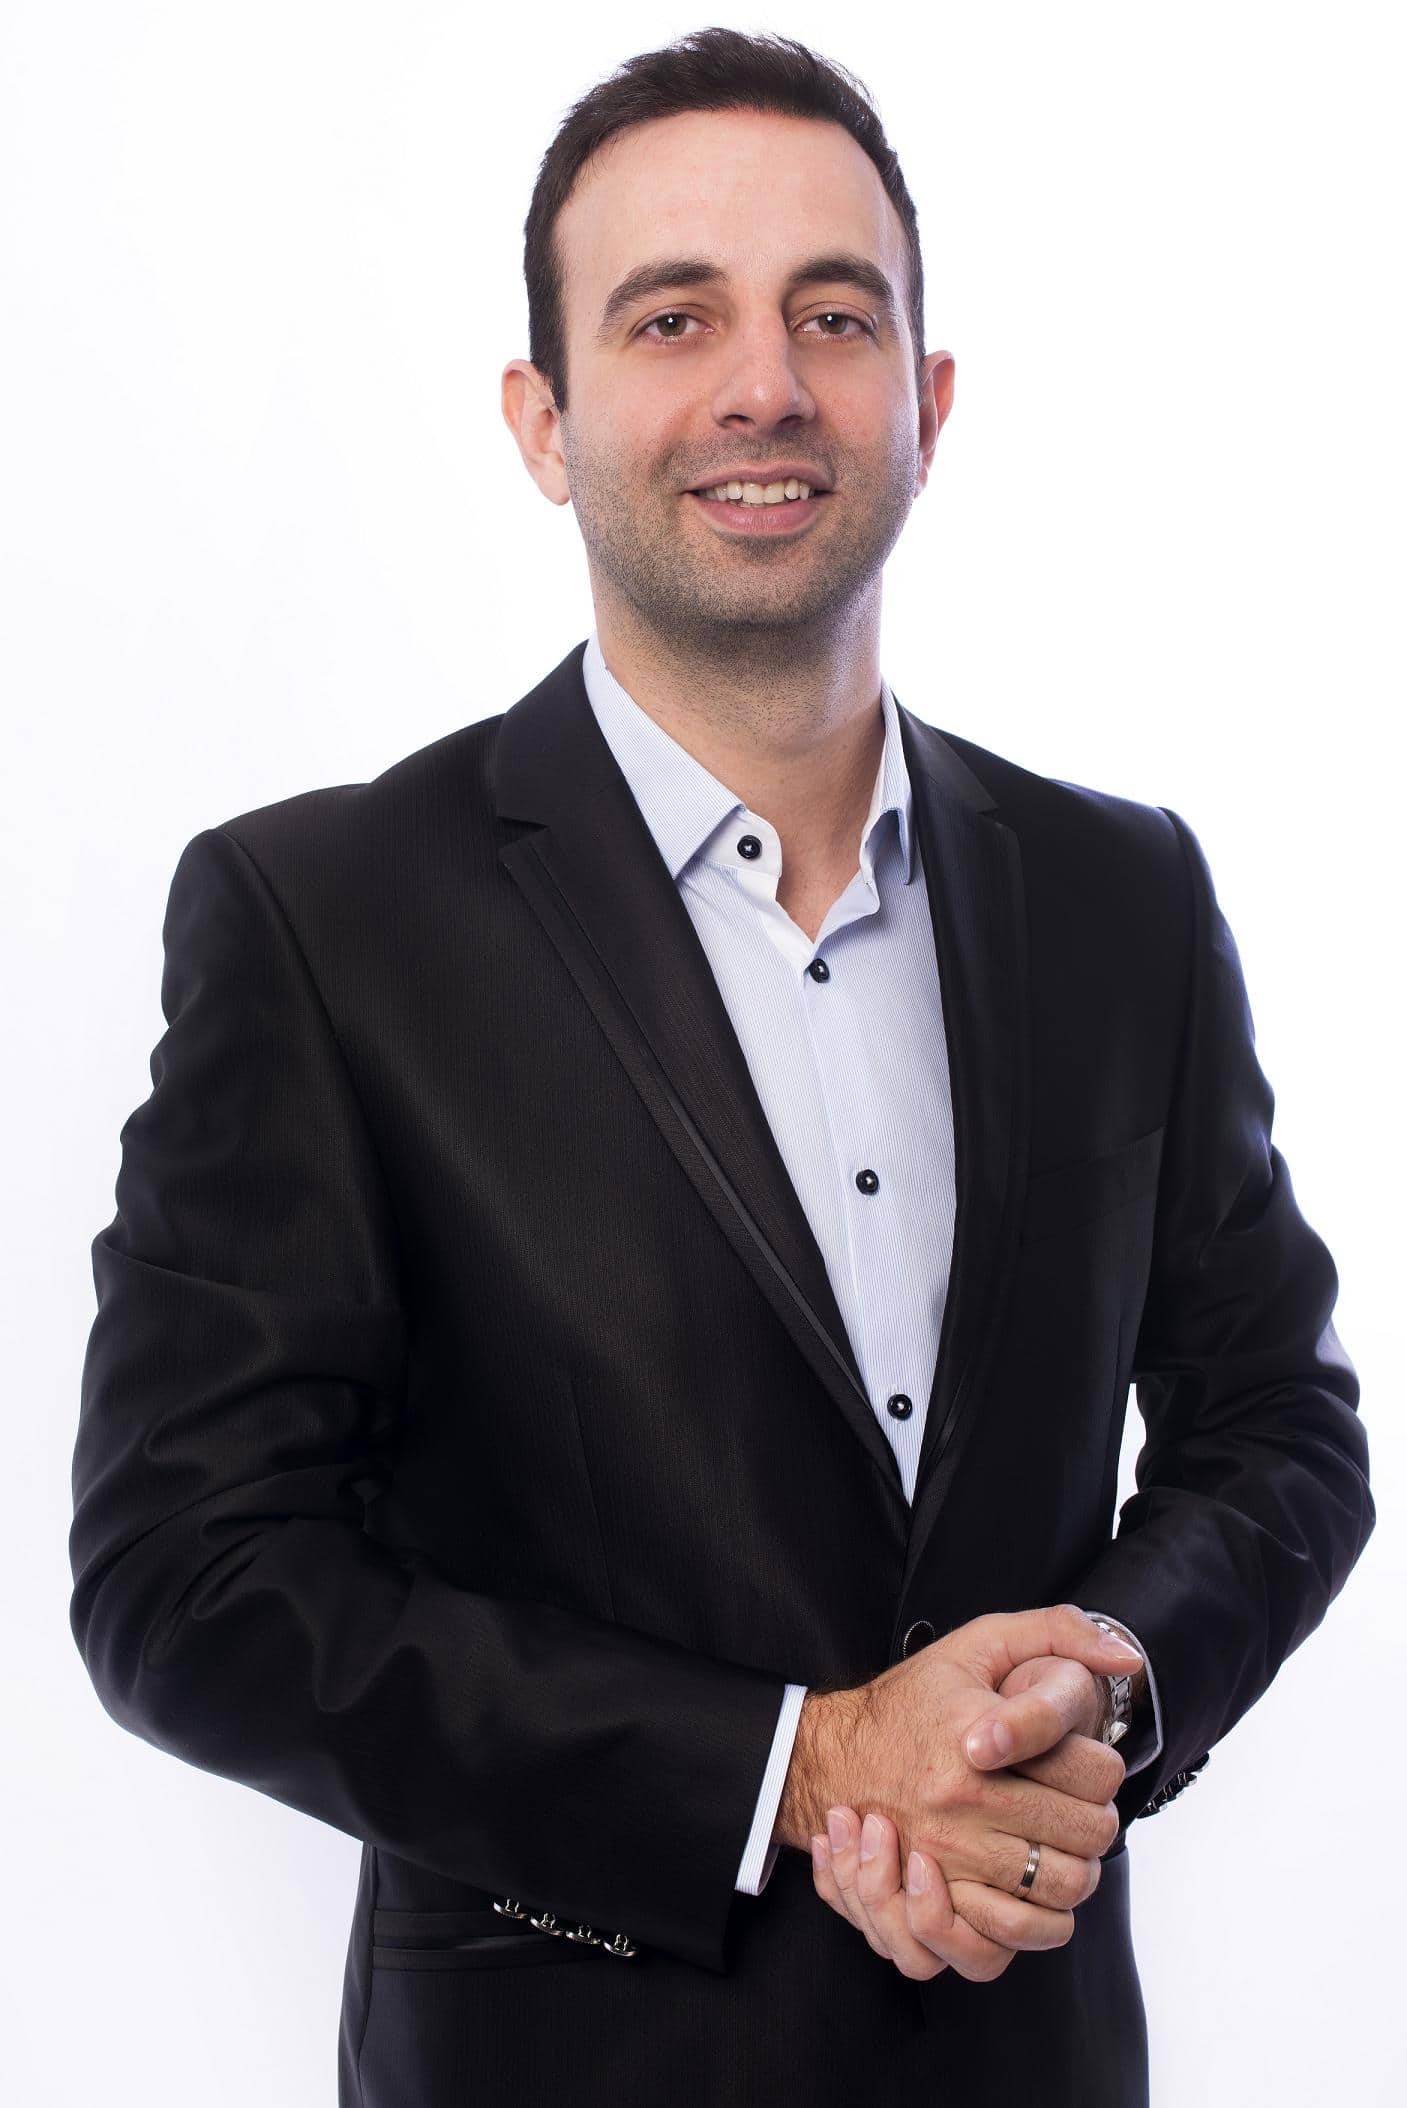 Gabor Molnar - CEO of HairPalace Clinic